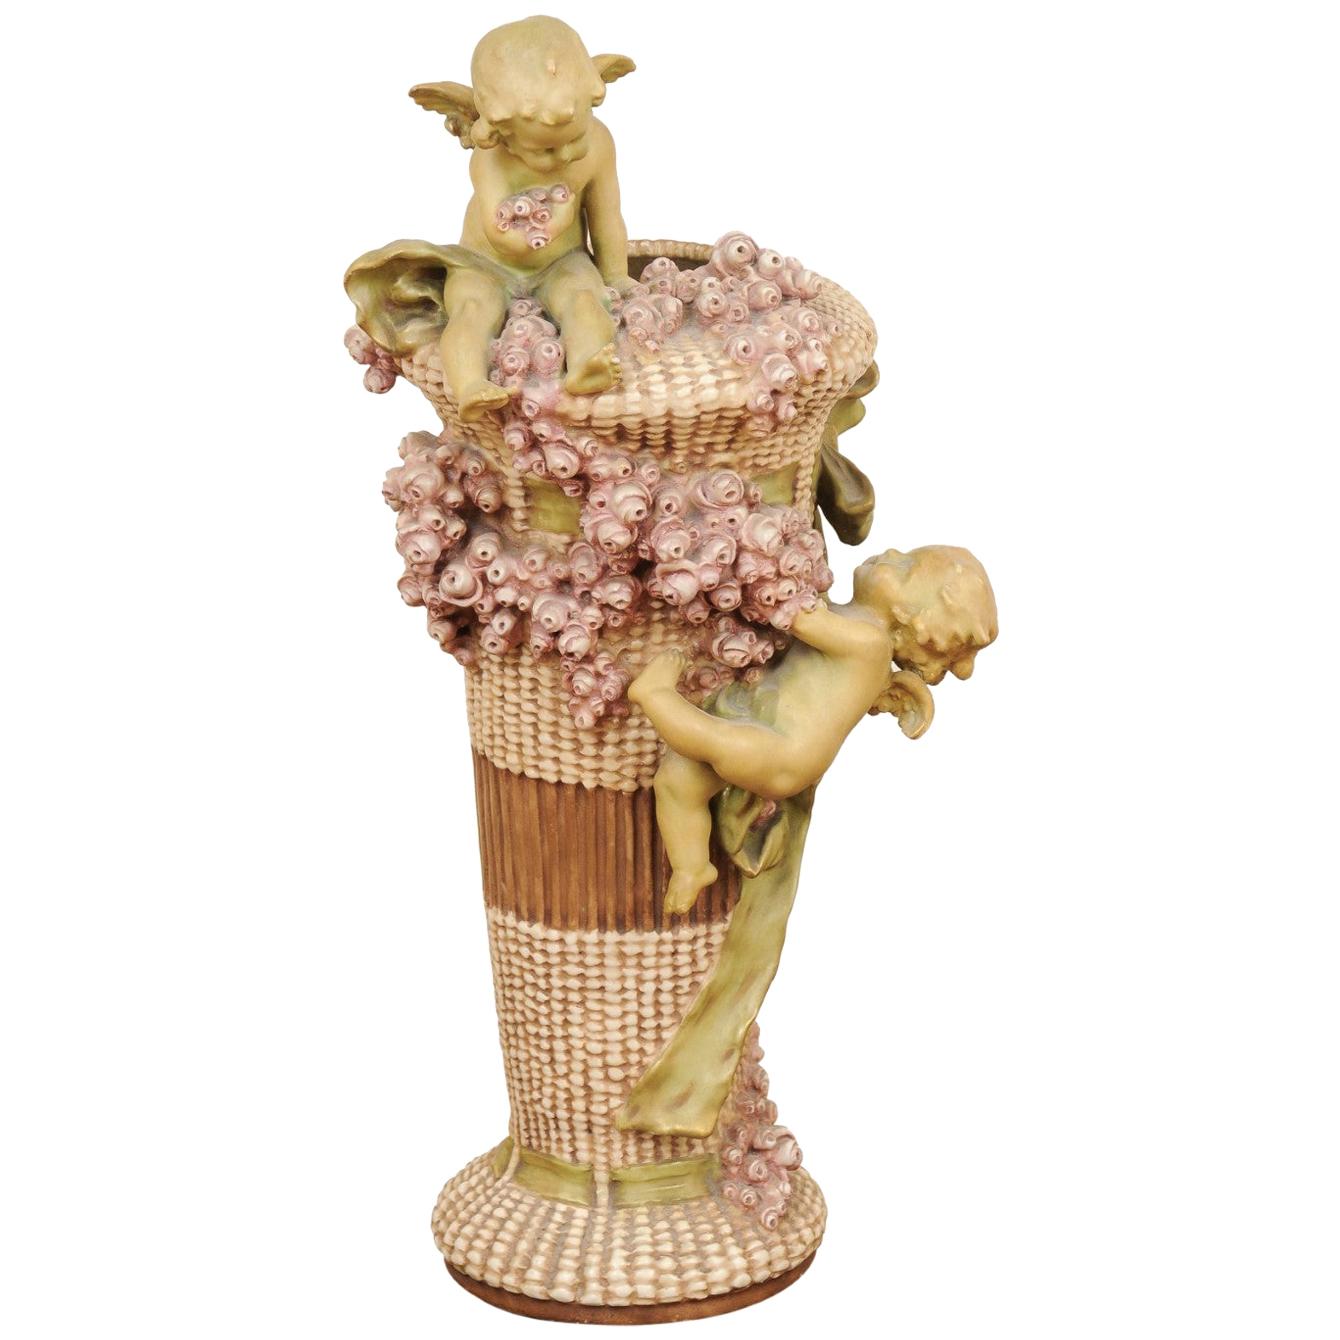 French 1860s Napoléon III Painted Terracotta Vase with Playful Cherubs and Roses